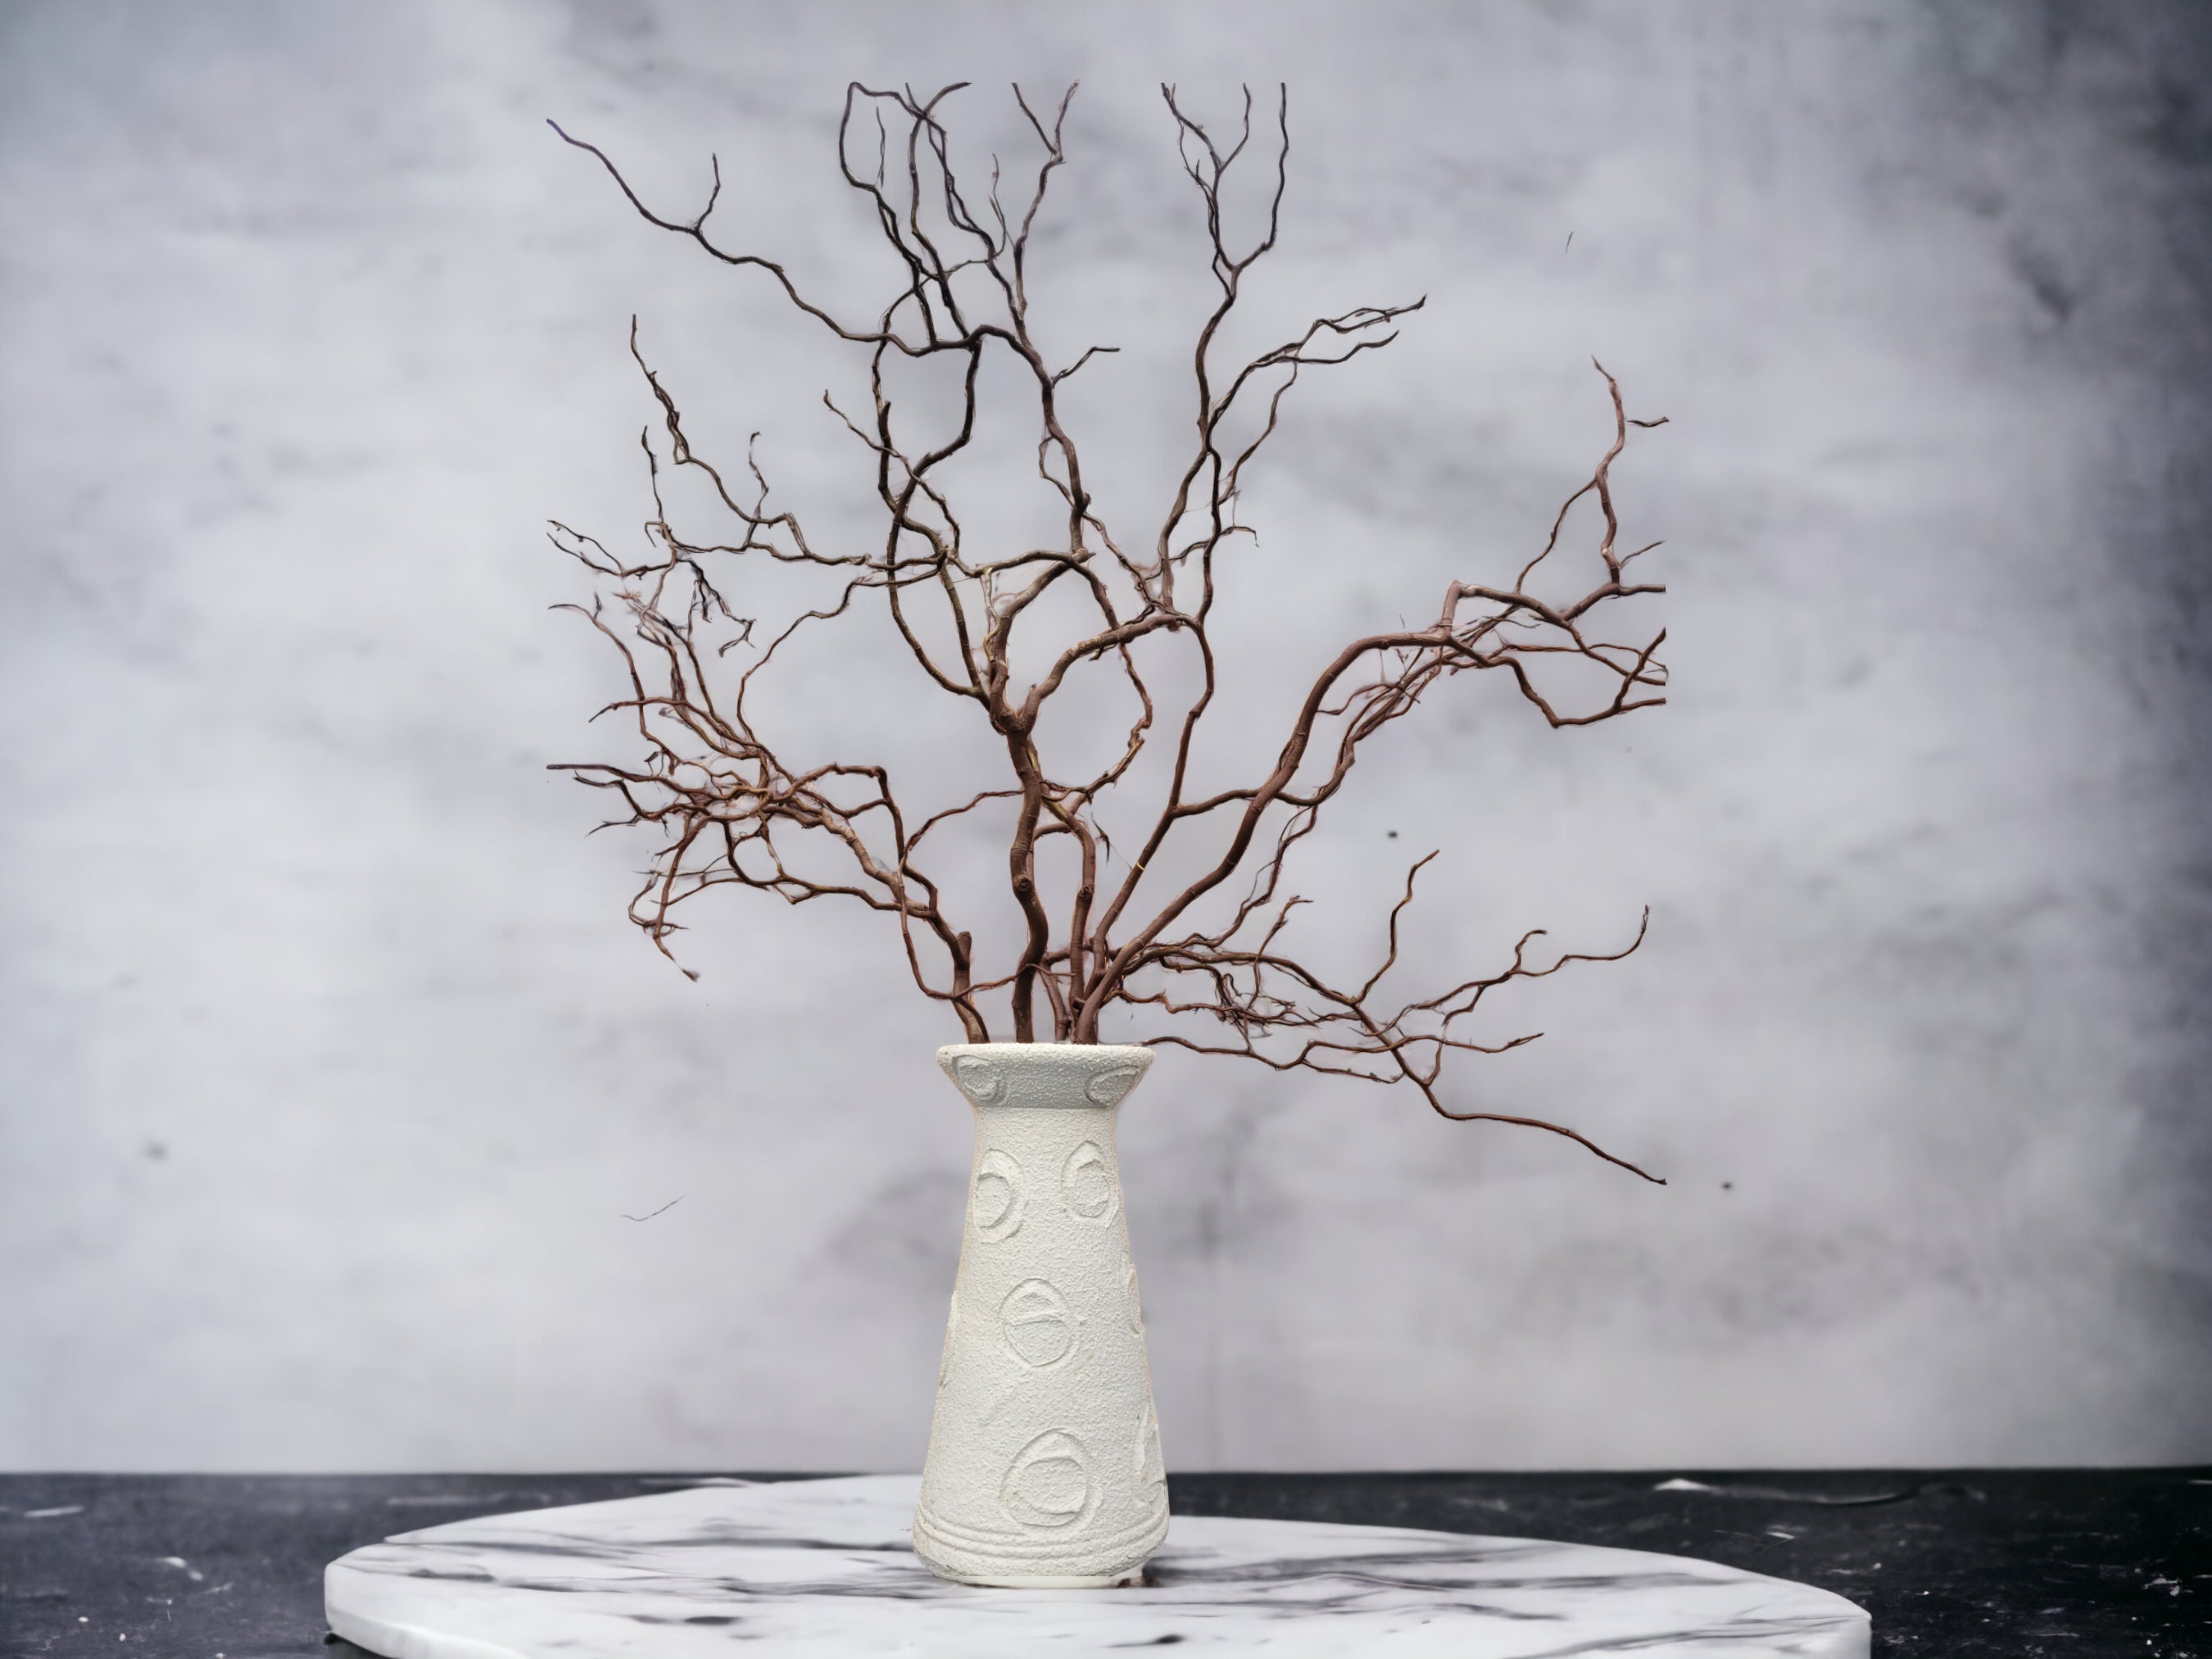 Dried Decorative Branches, Natural Branches, Brown Branches